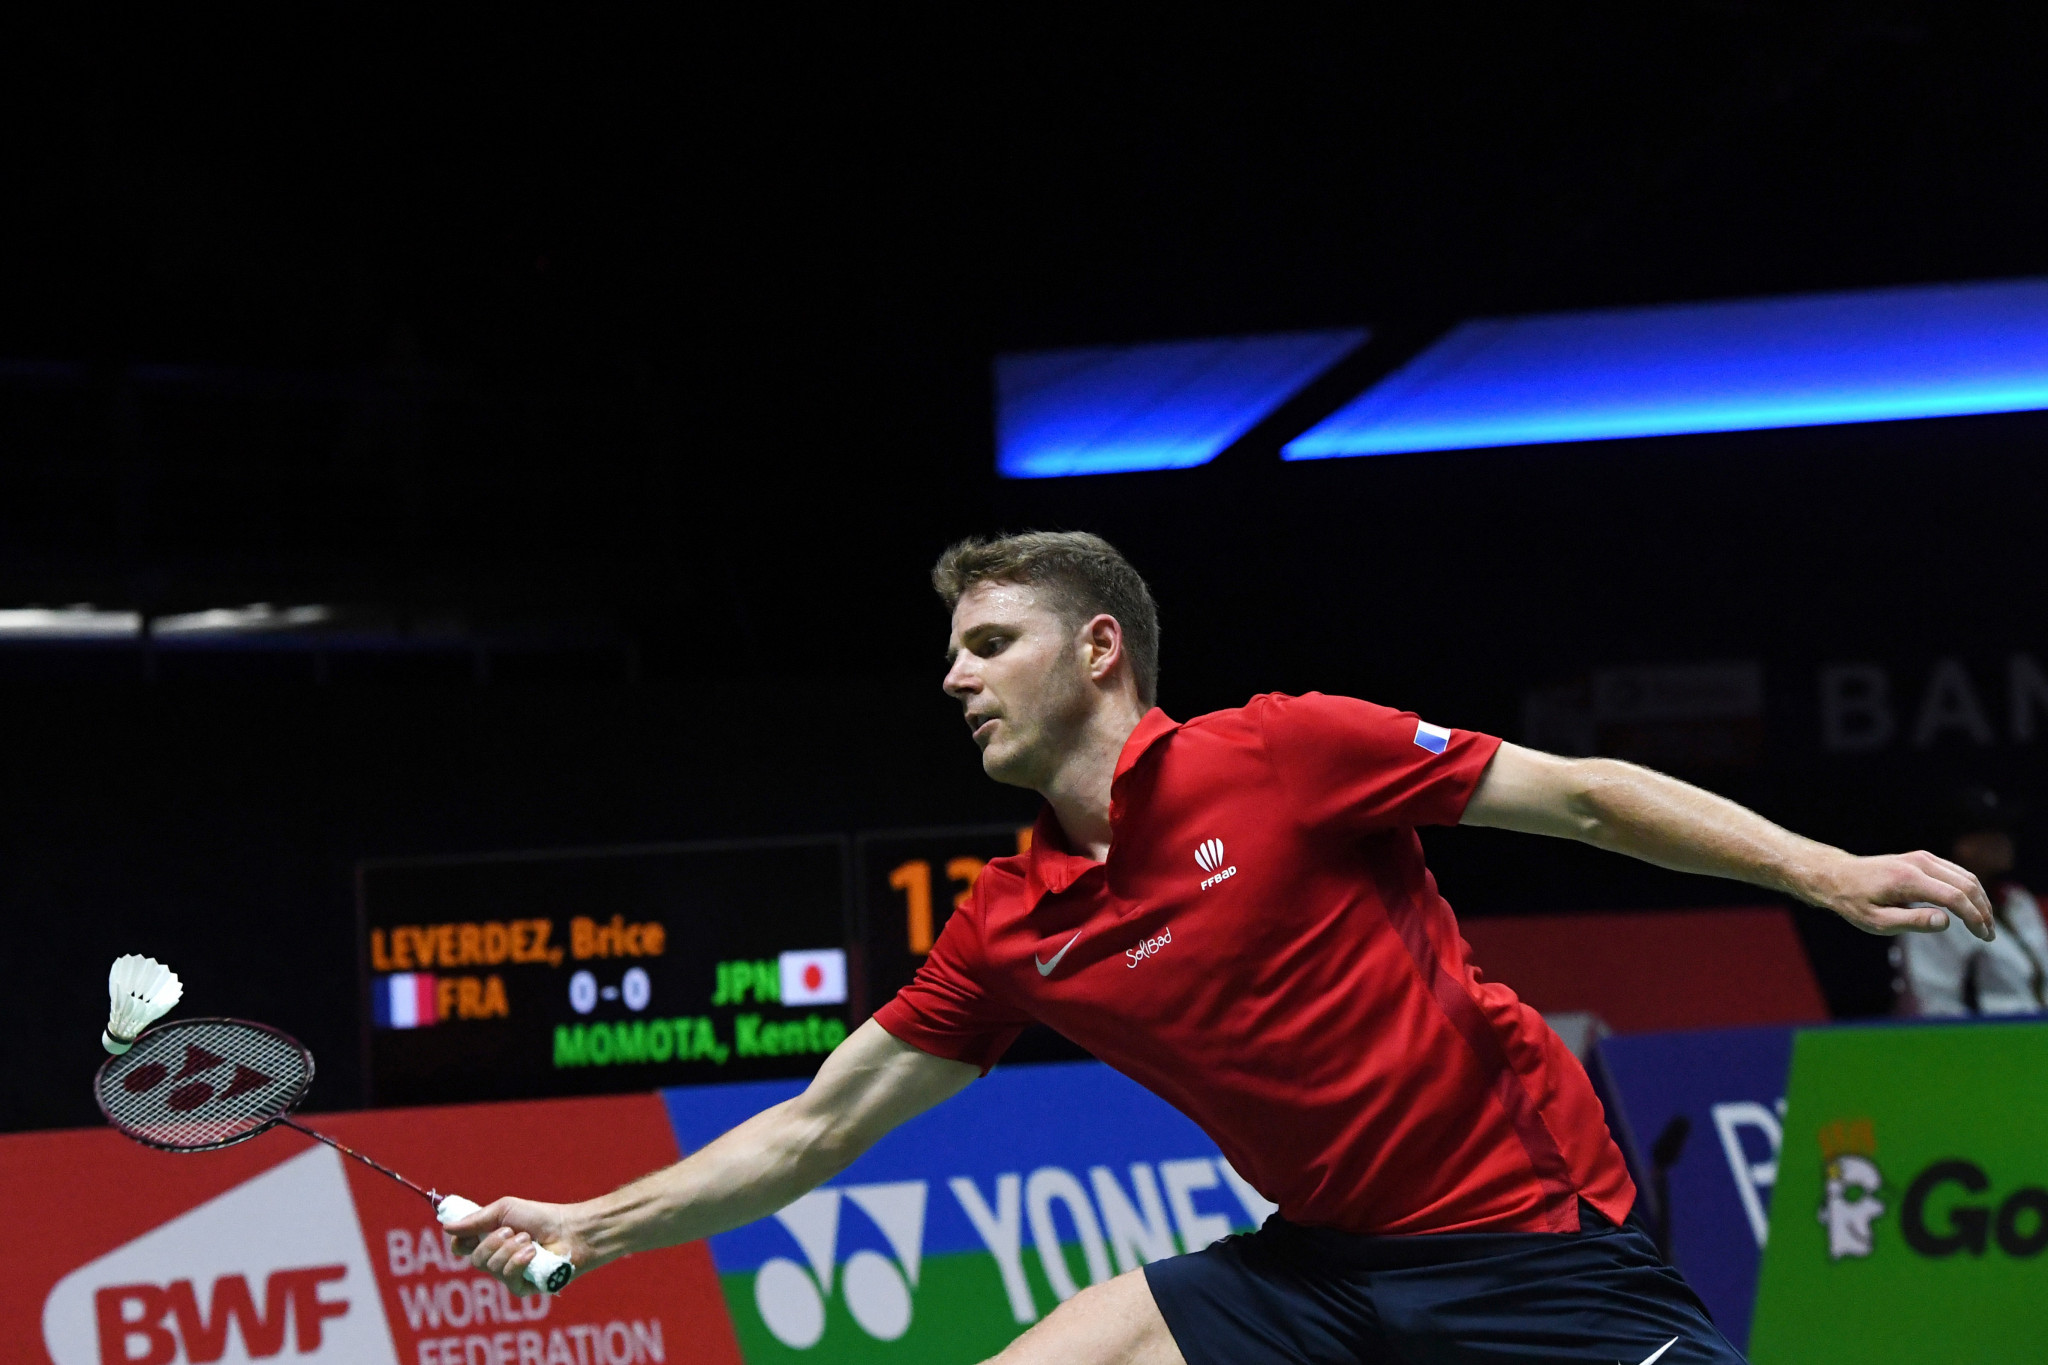 France's Brice Leverdez was another top seed in the men's draw to suffer defeat ©Getty Images